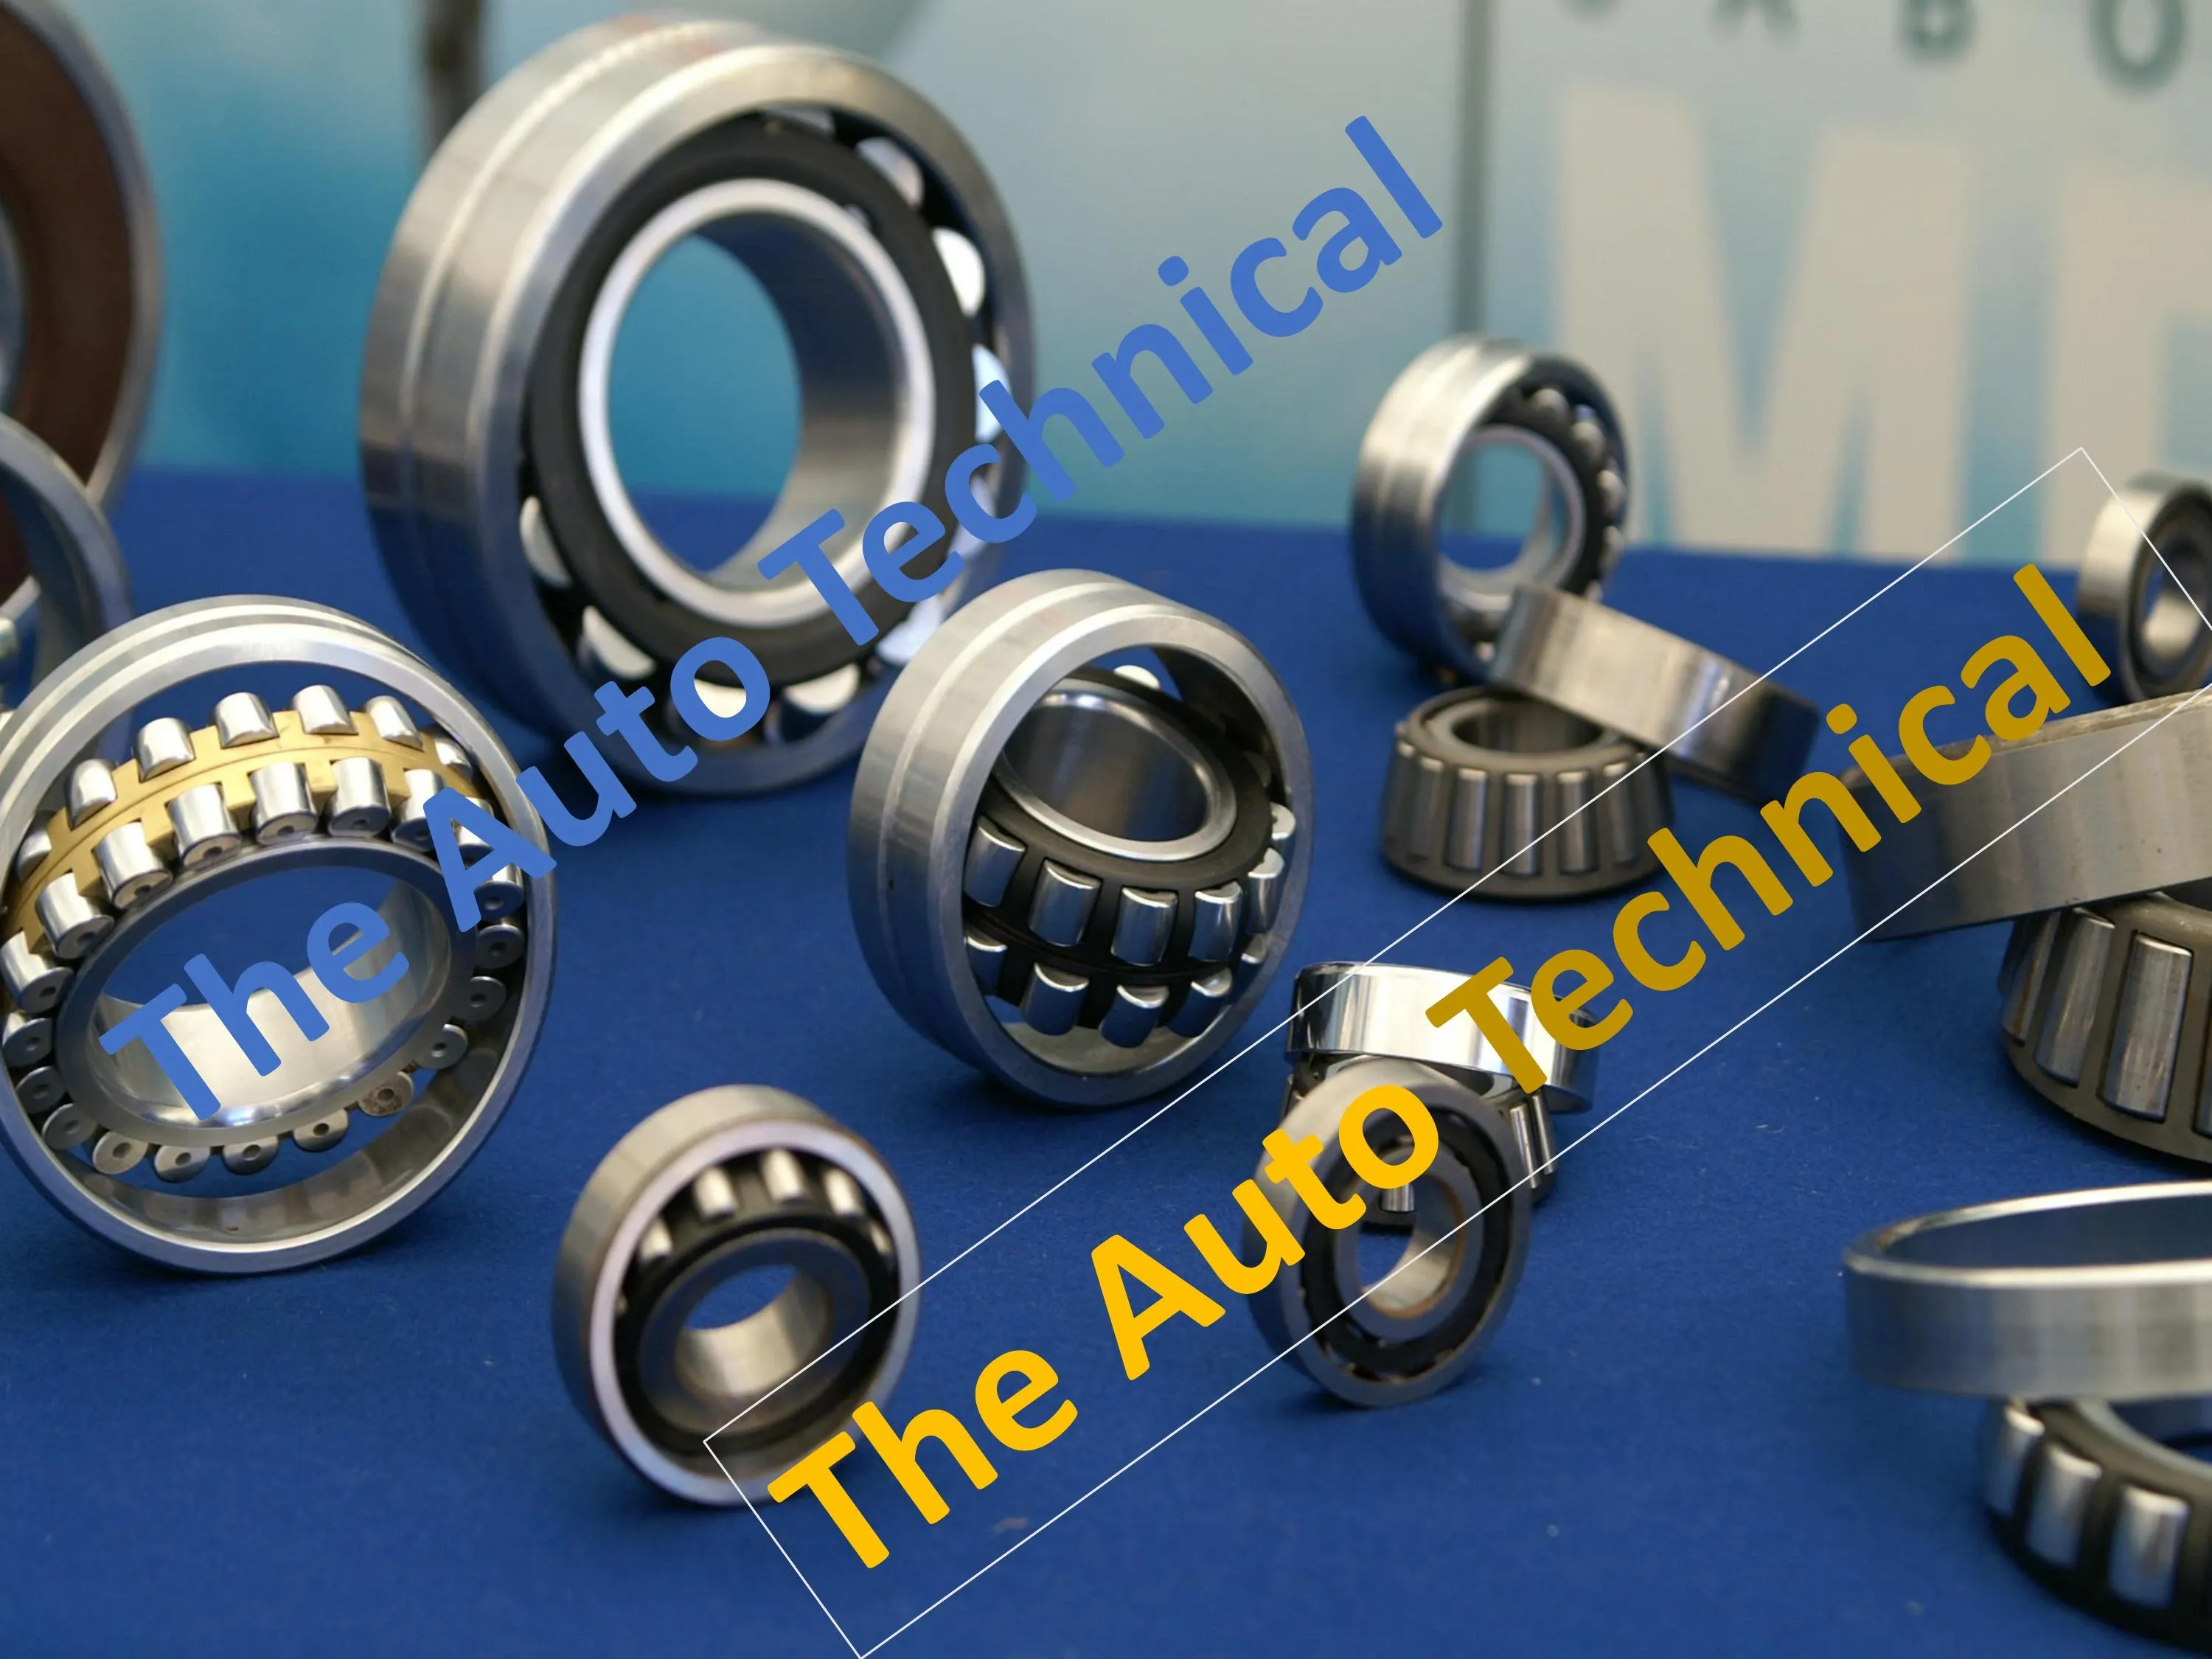 bearing-technology-50-questions-and-answers